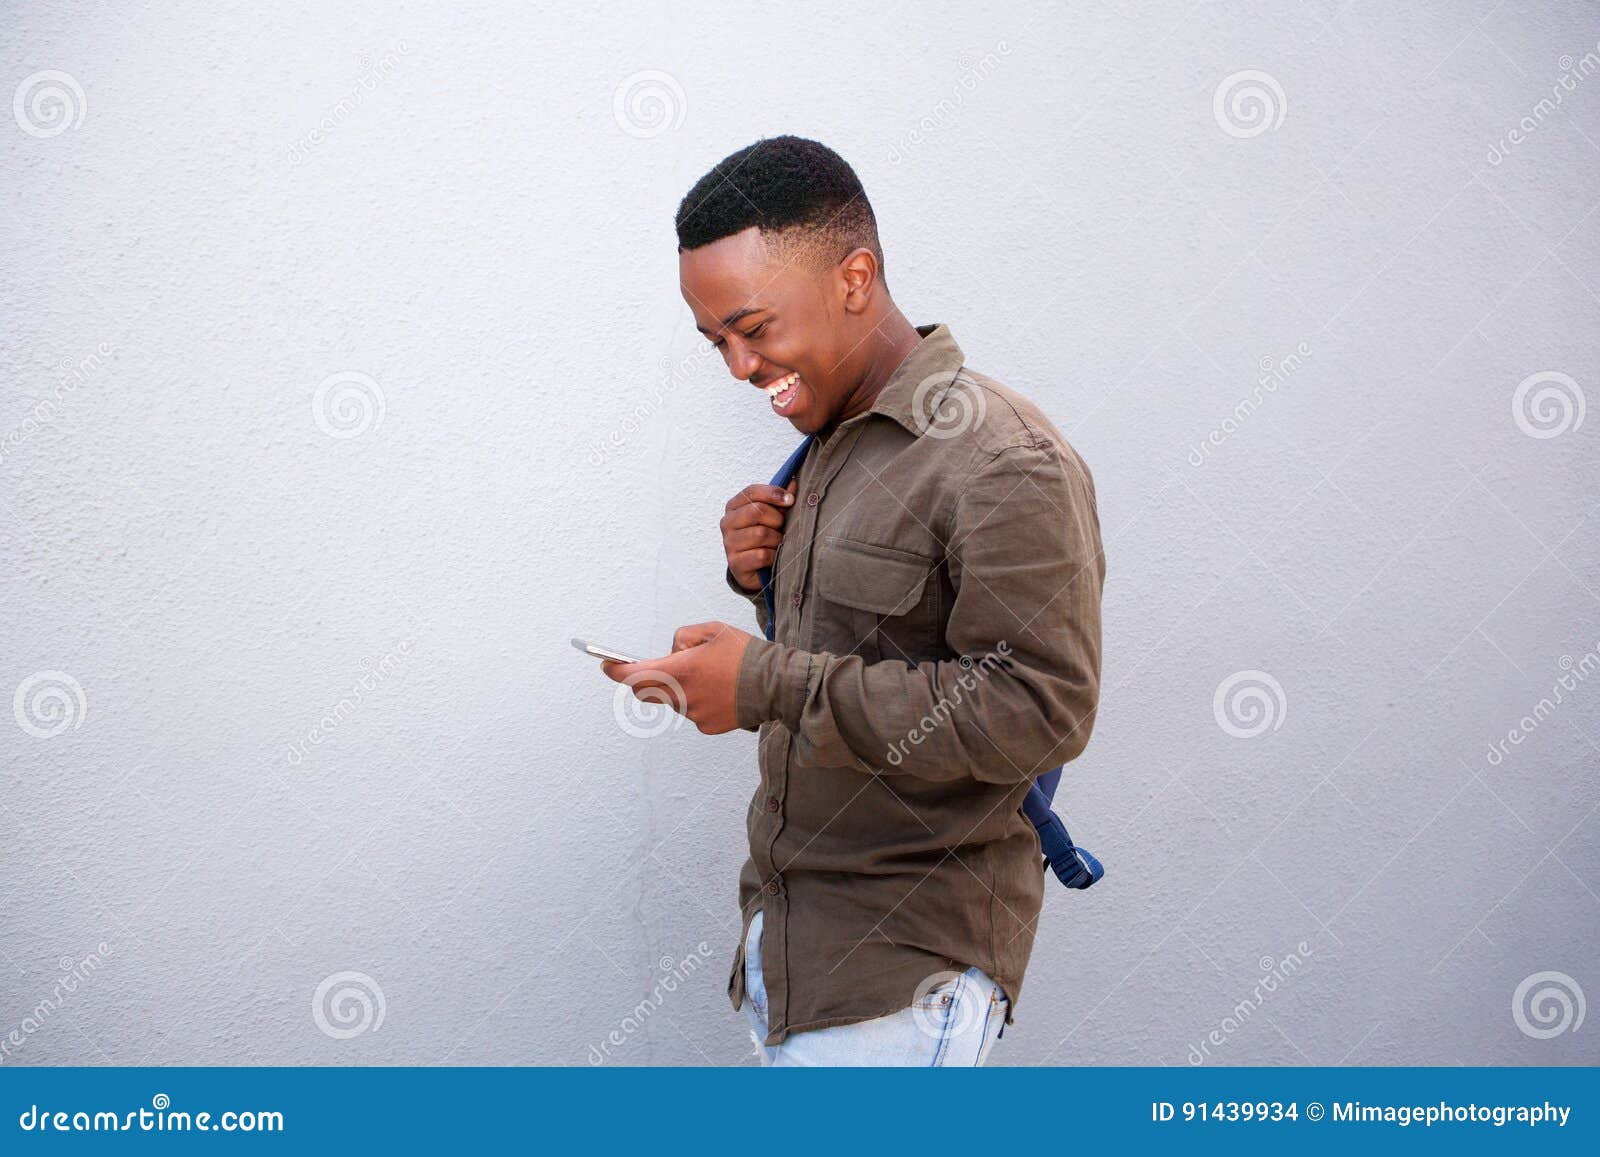 happy young black man looking at cellphone